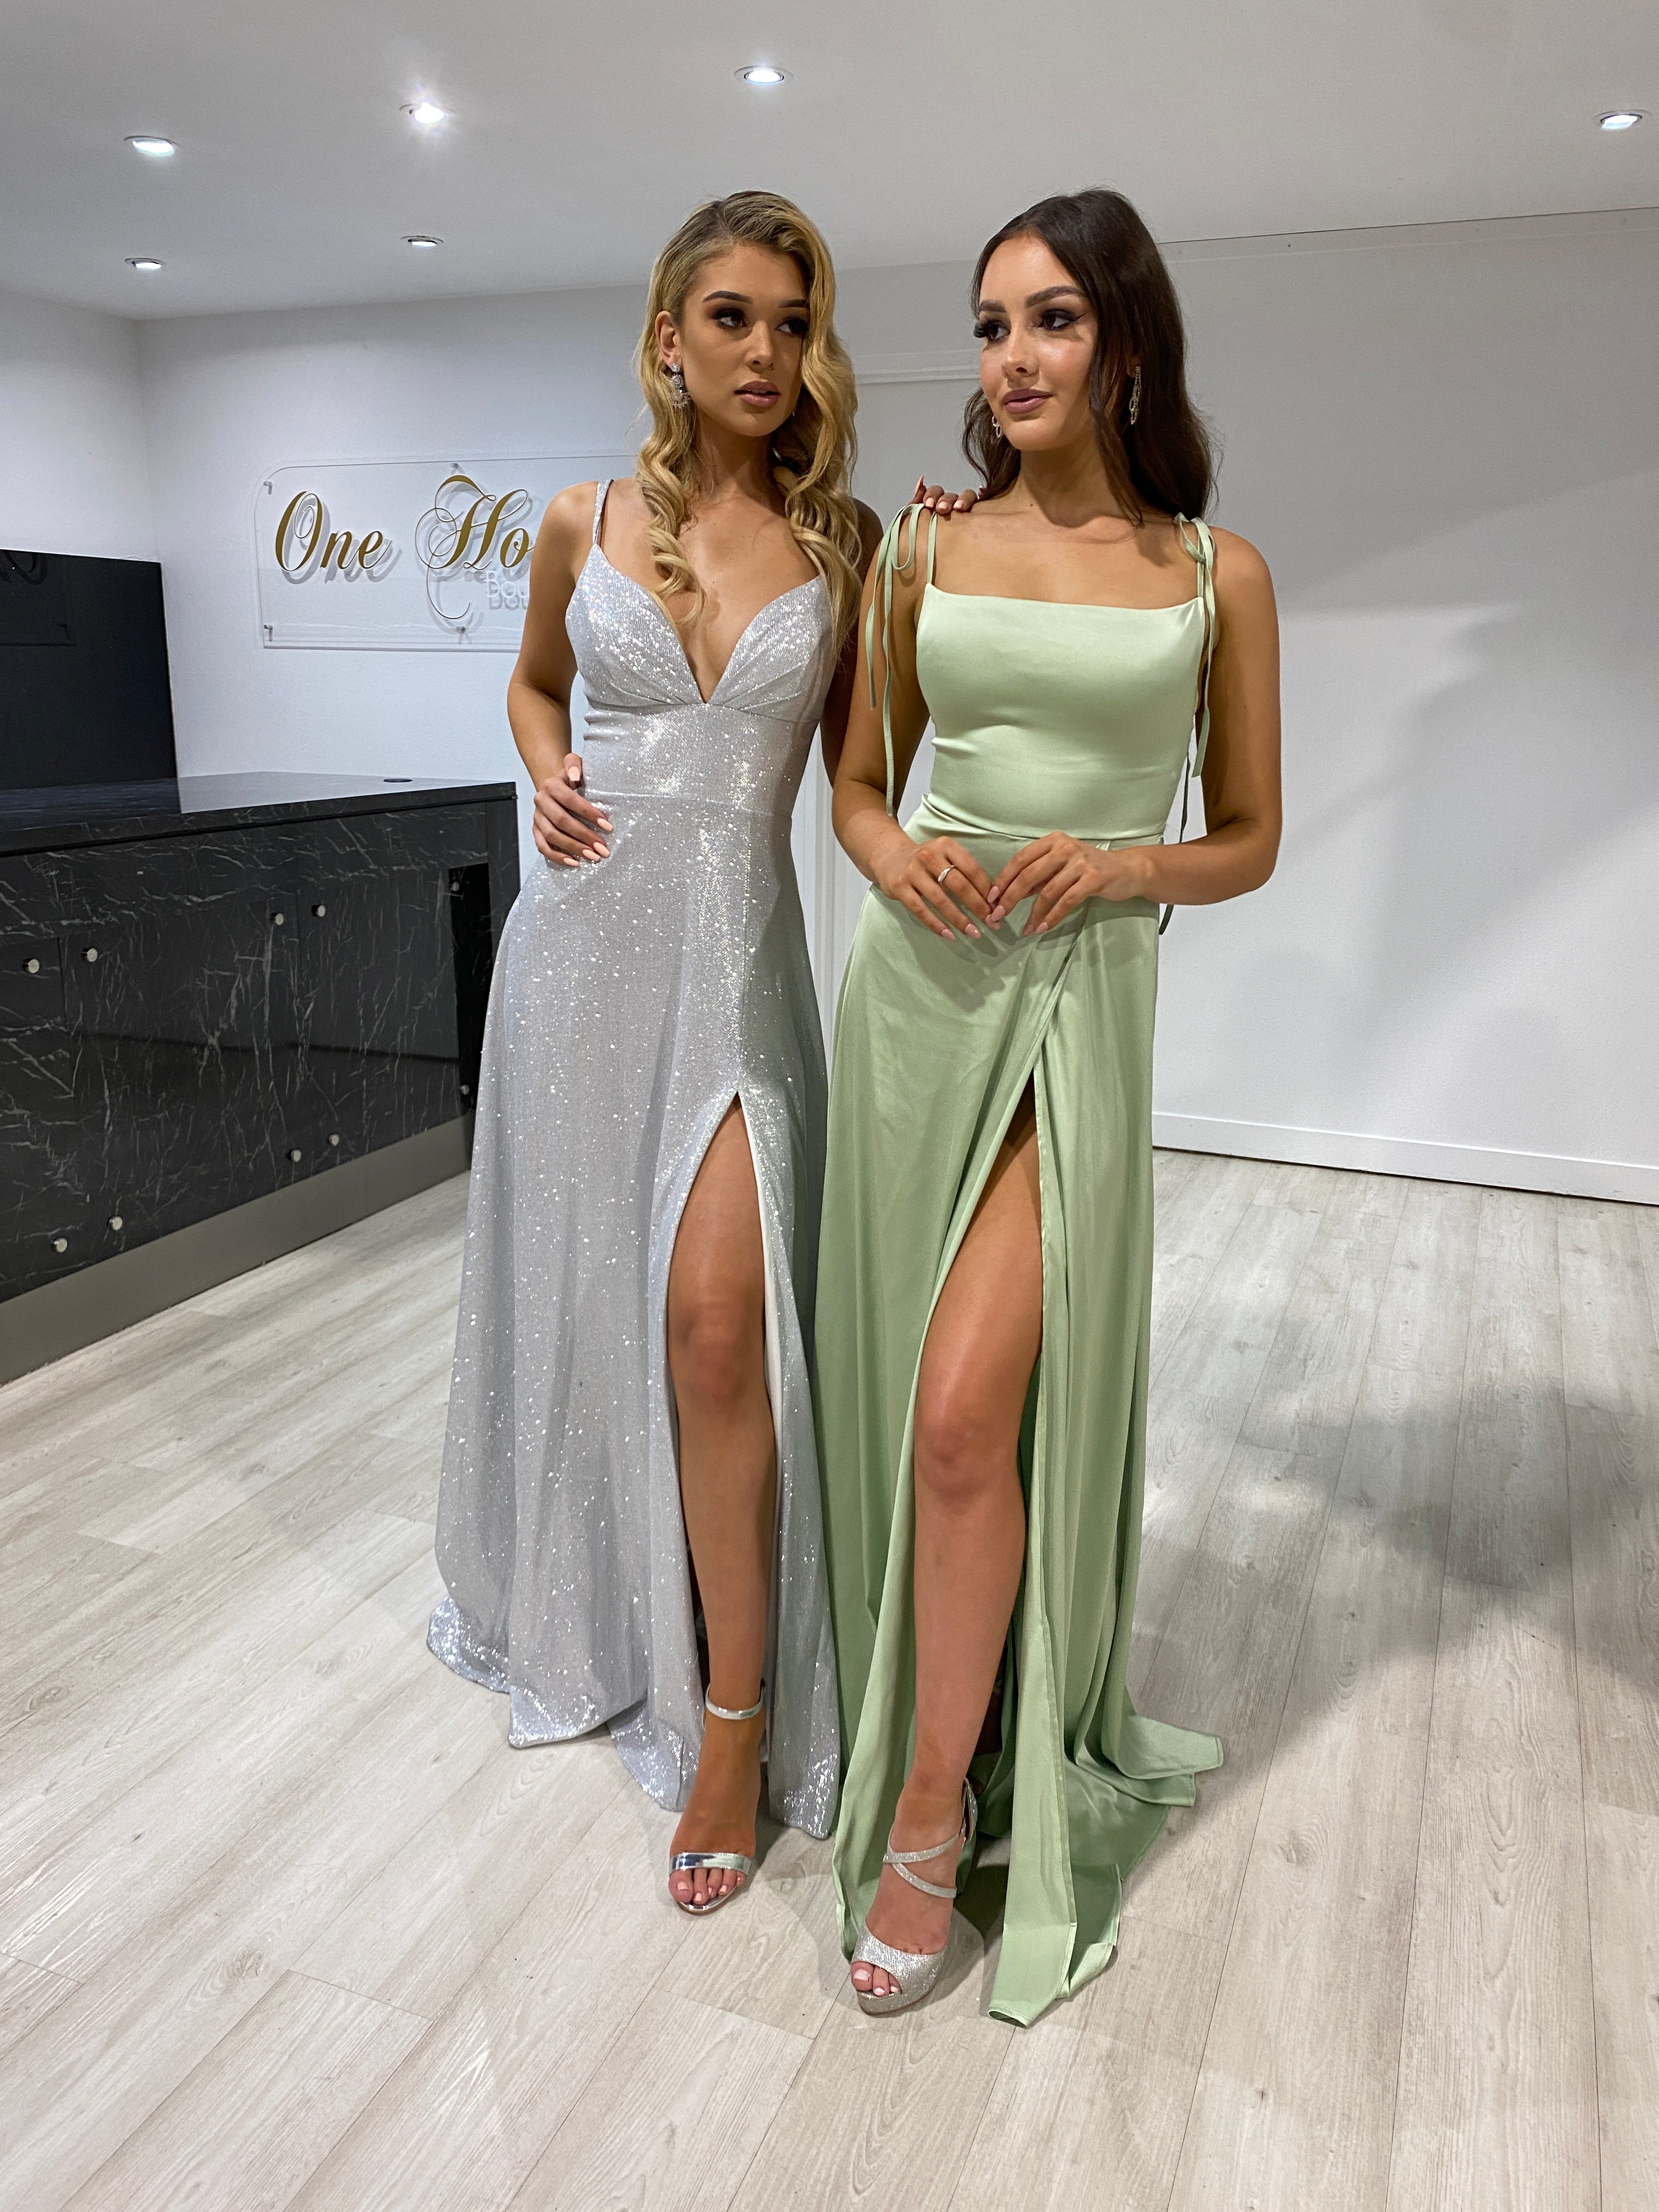 Honey Couture XENIA Sage Green Tie Up Formal Bridesmaid Dress